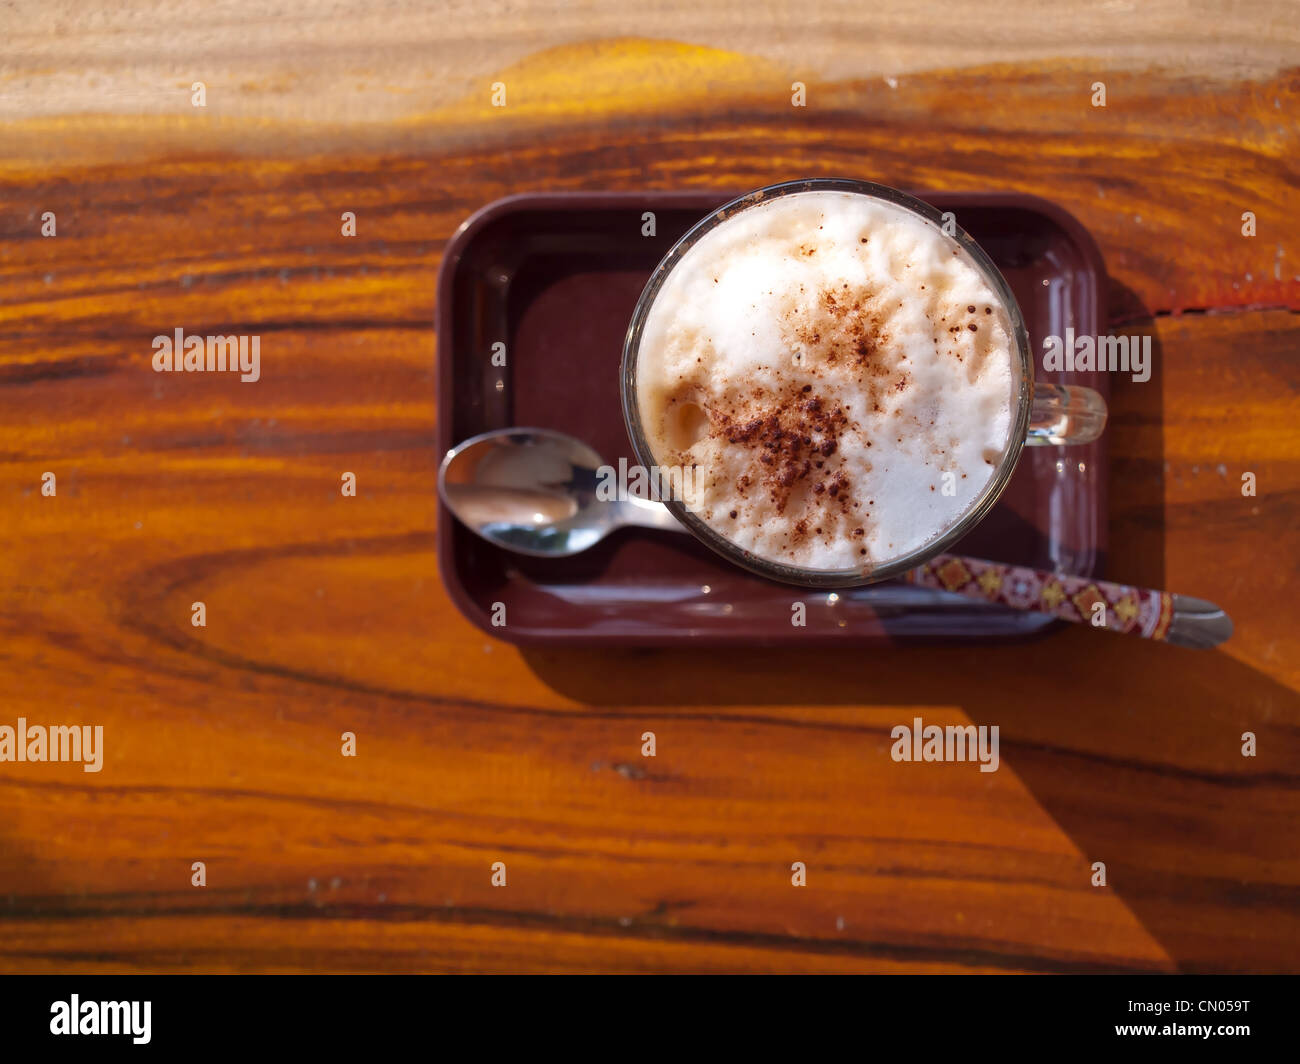 Top view of cup of coffee latte Stock Photo